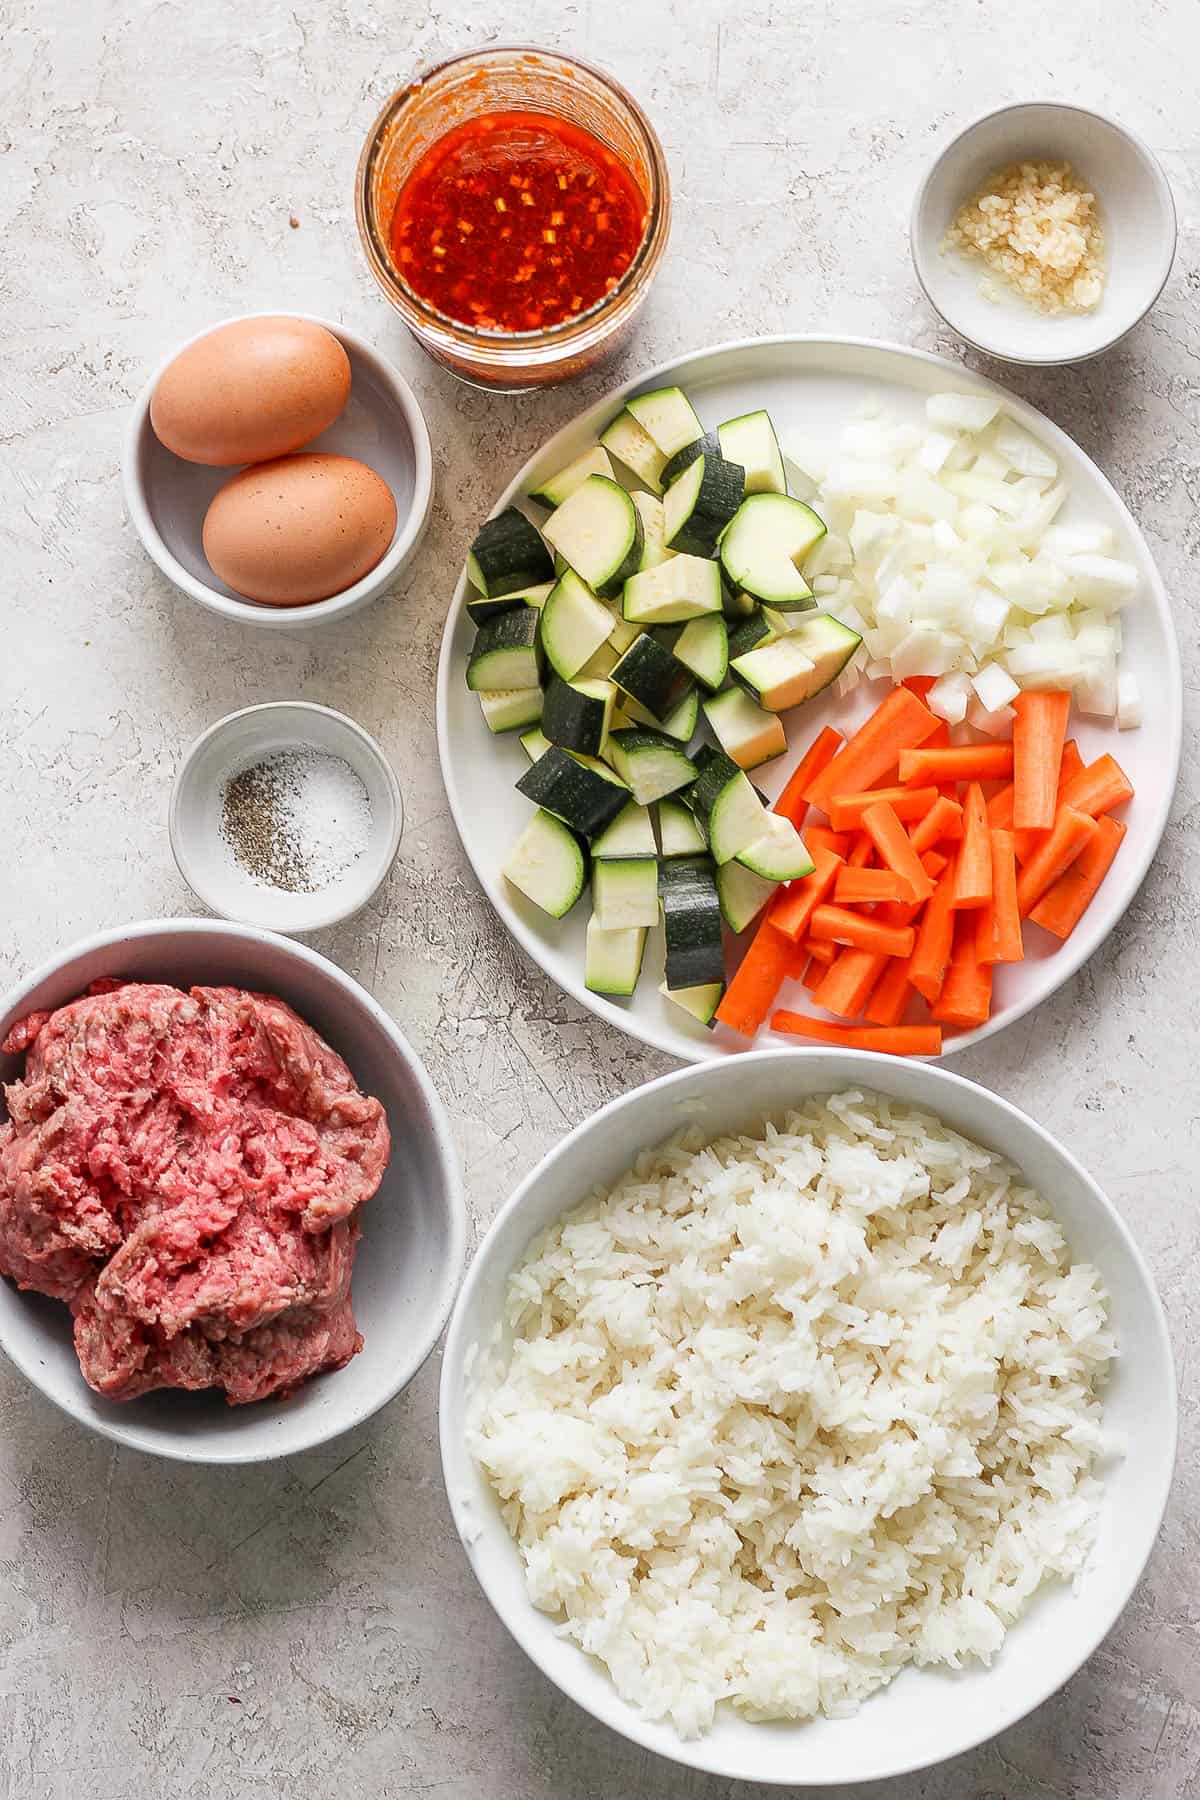 Ingredients for ground beef rice bowls in separate bowls.